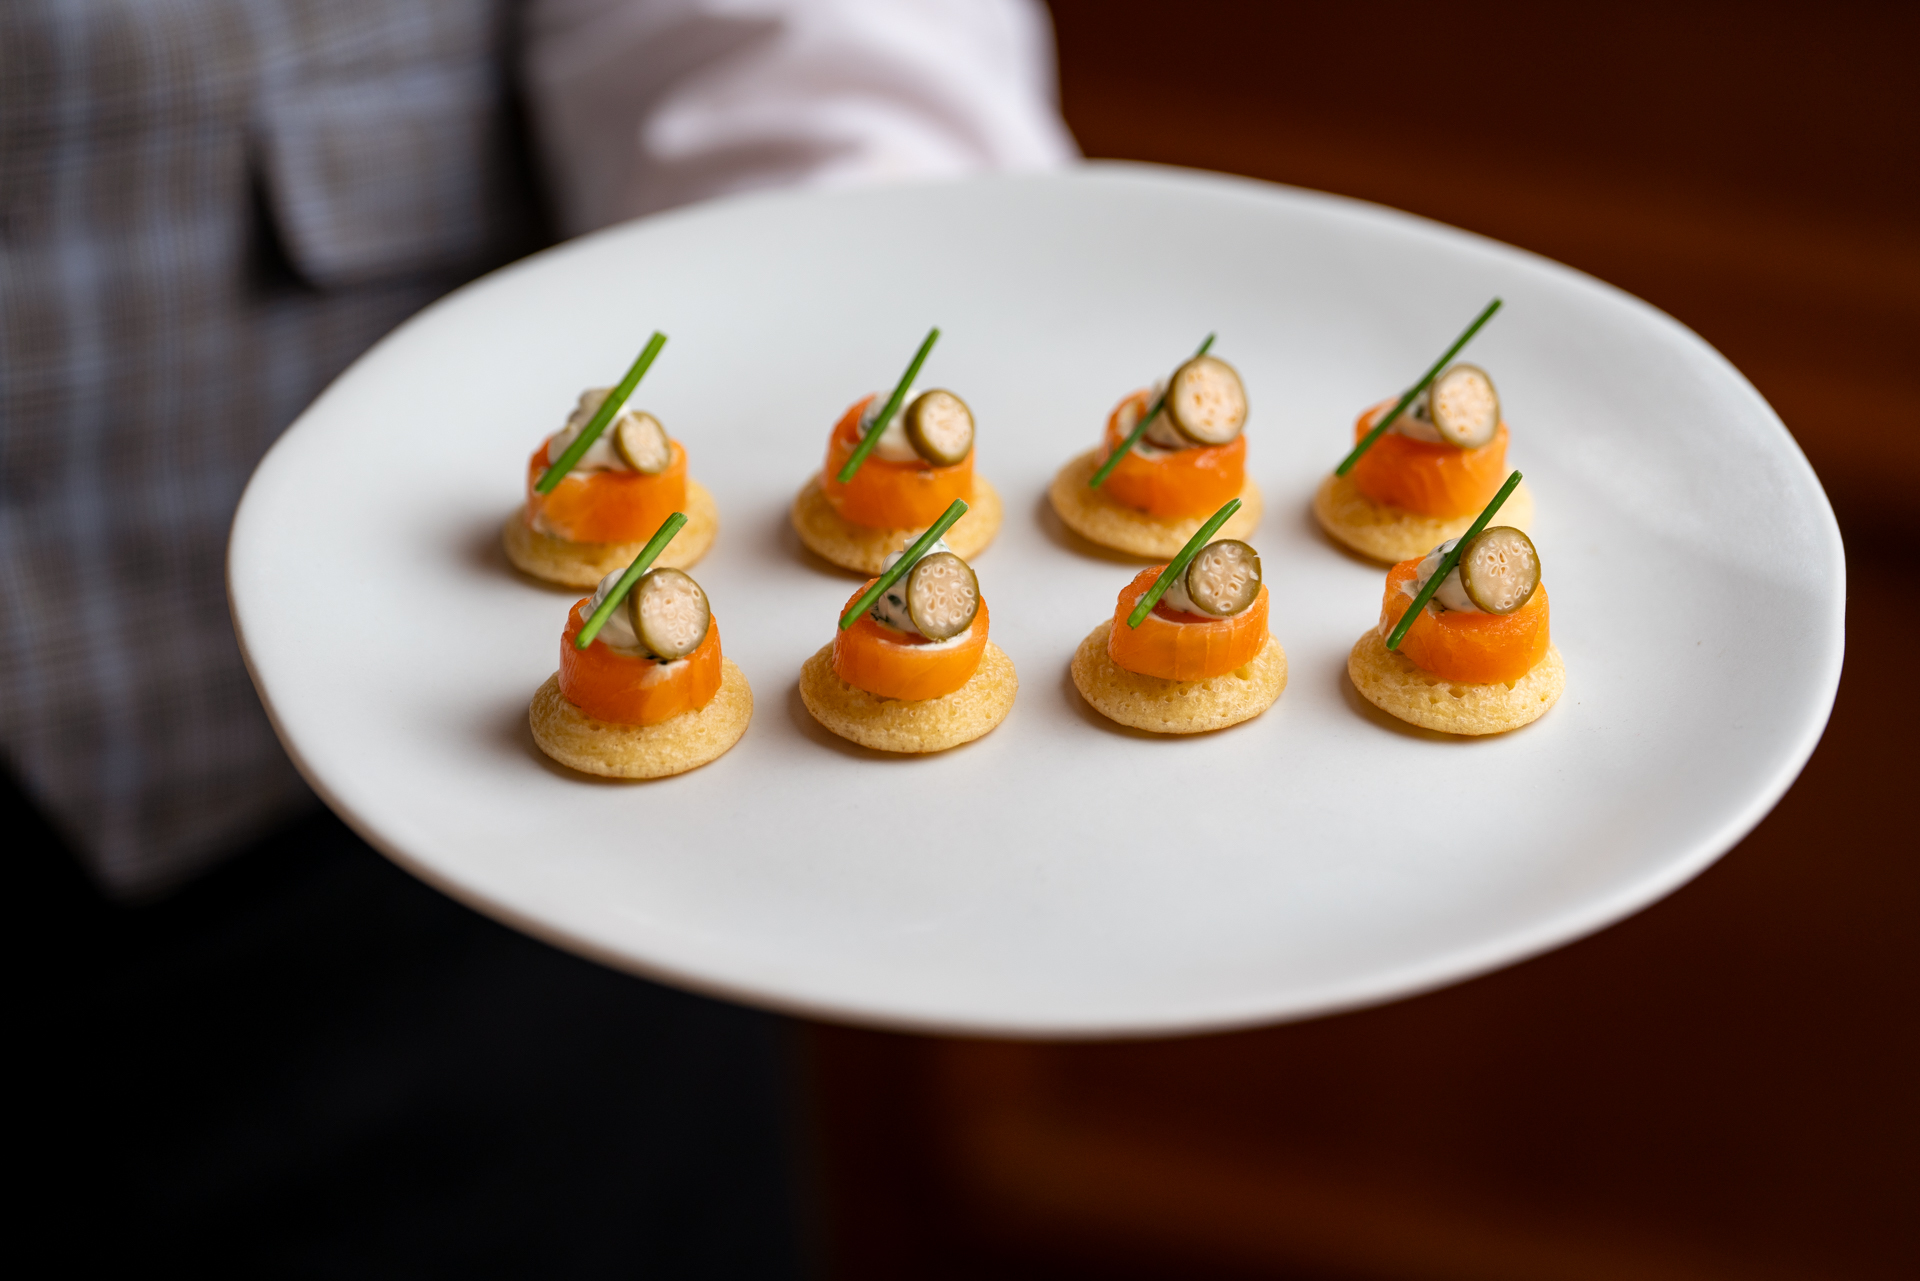 Canapes may be small but they deliver impact and taste